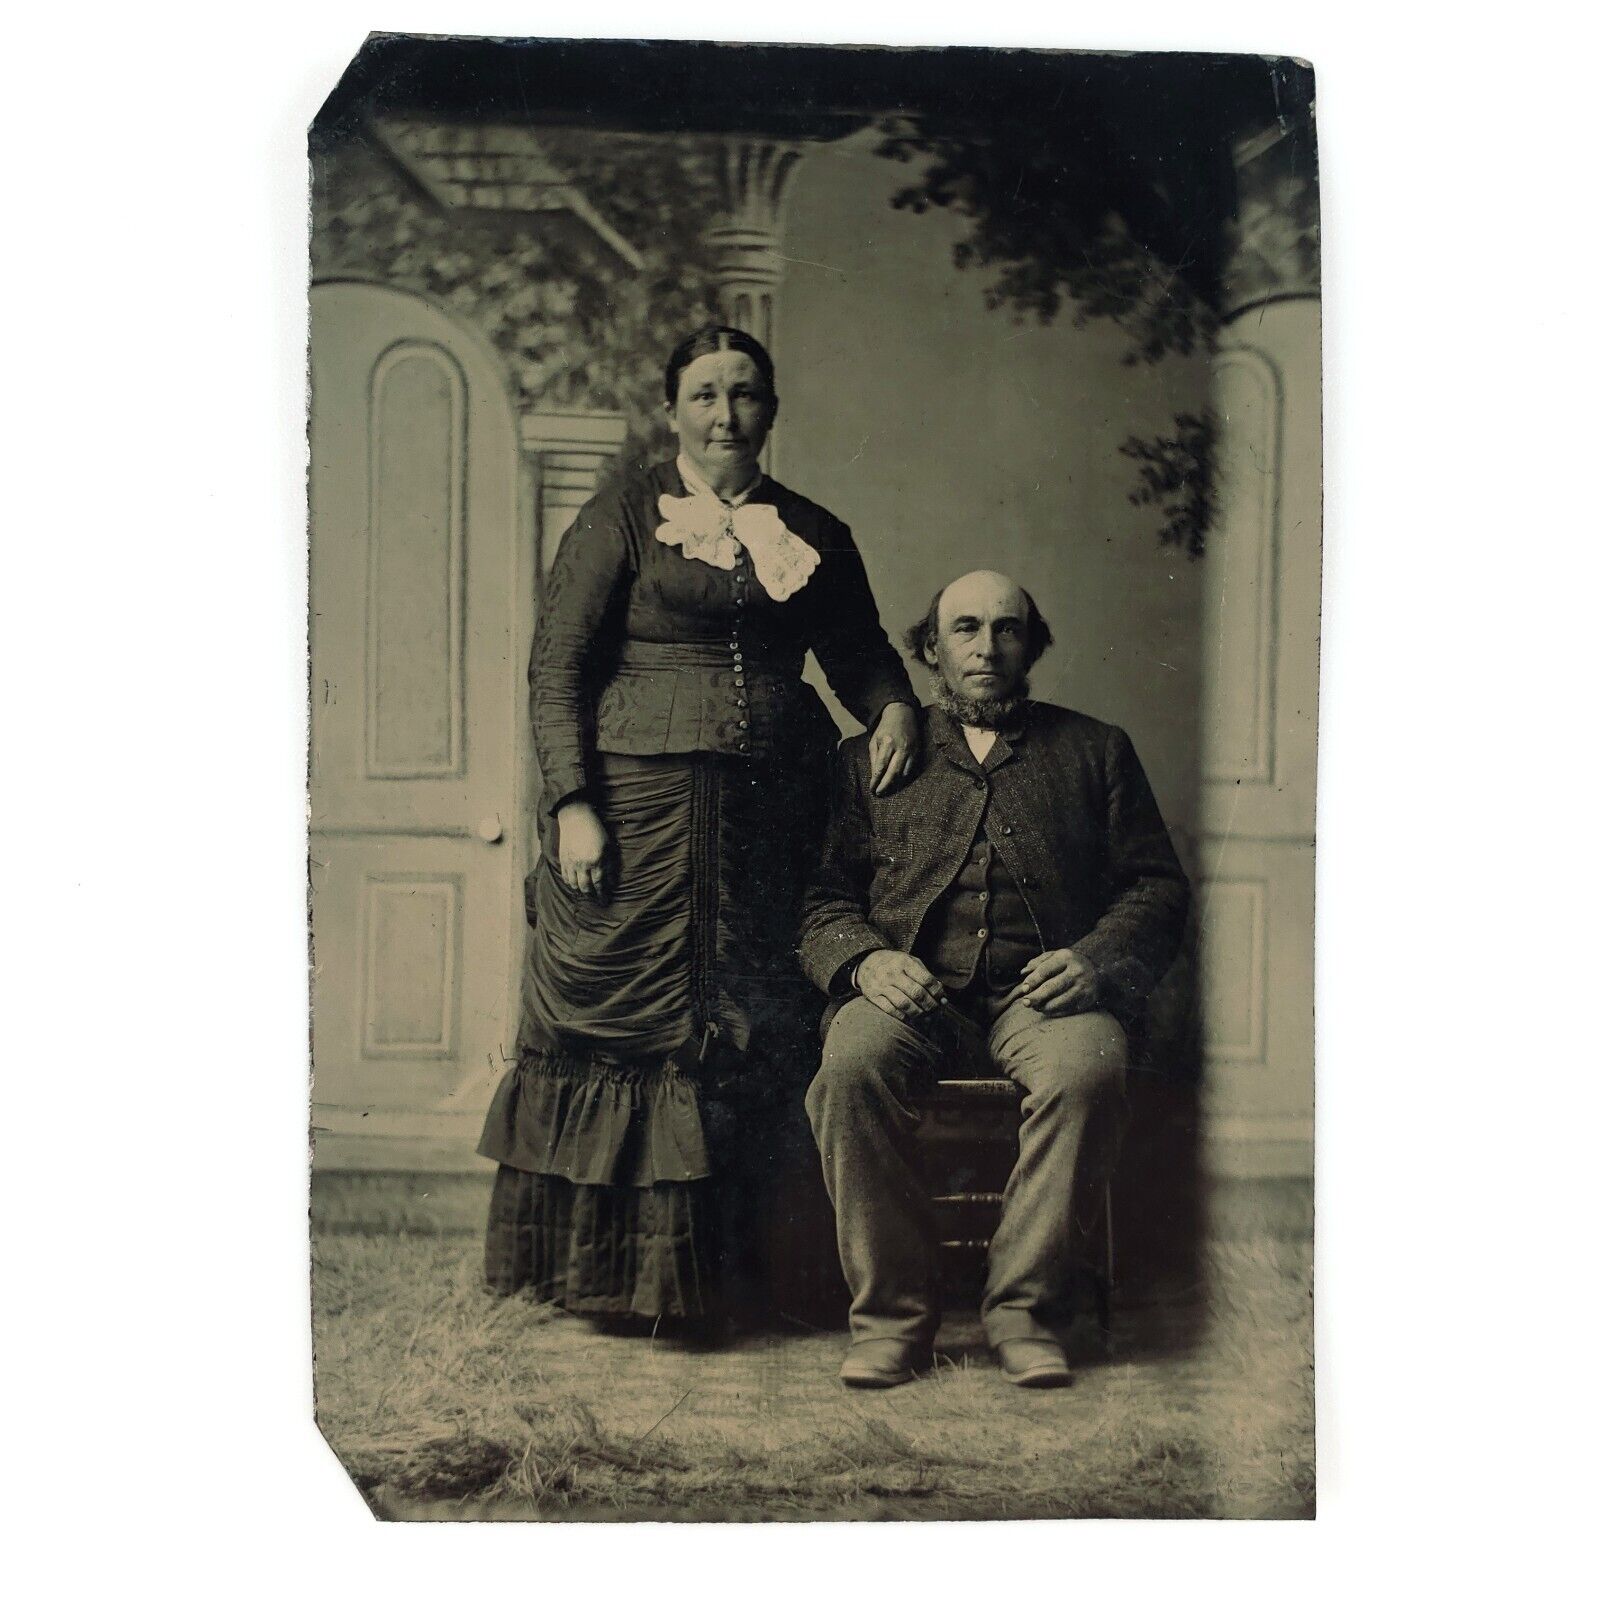 Bald Chin Curtain Man Tintype c1870 Old Rural Couple 1/6 Plate Lady Photo A2923